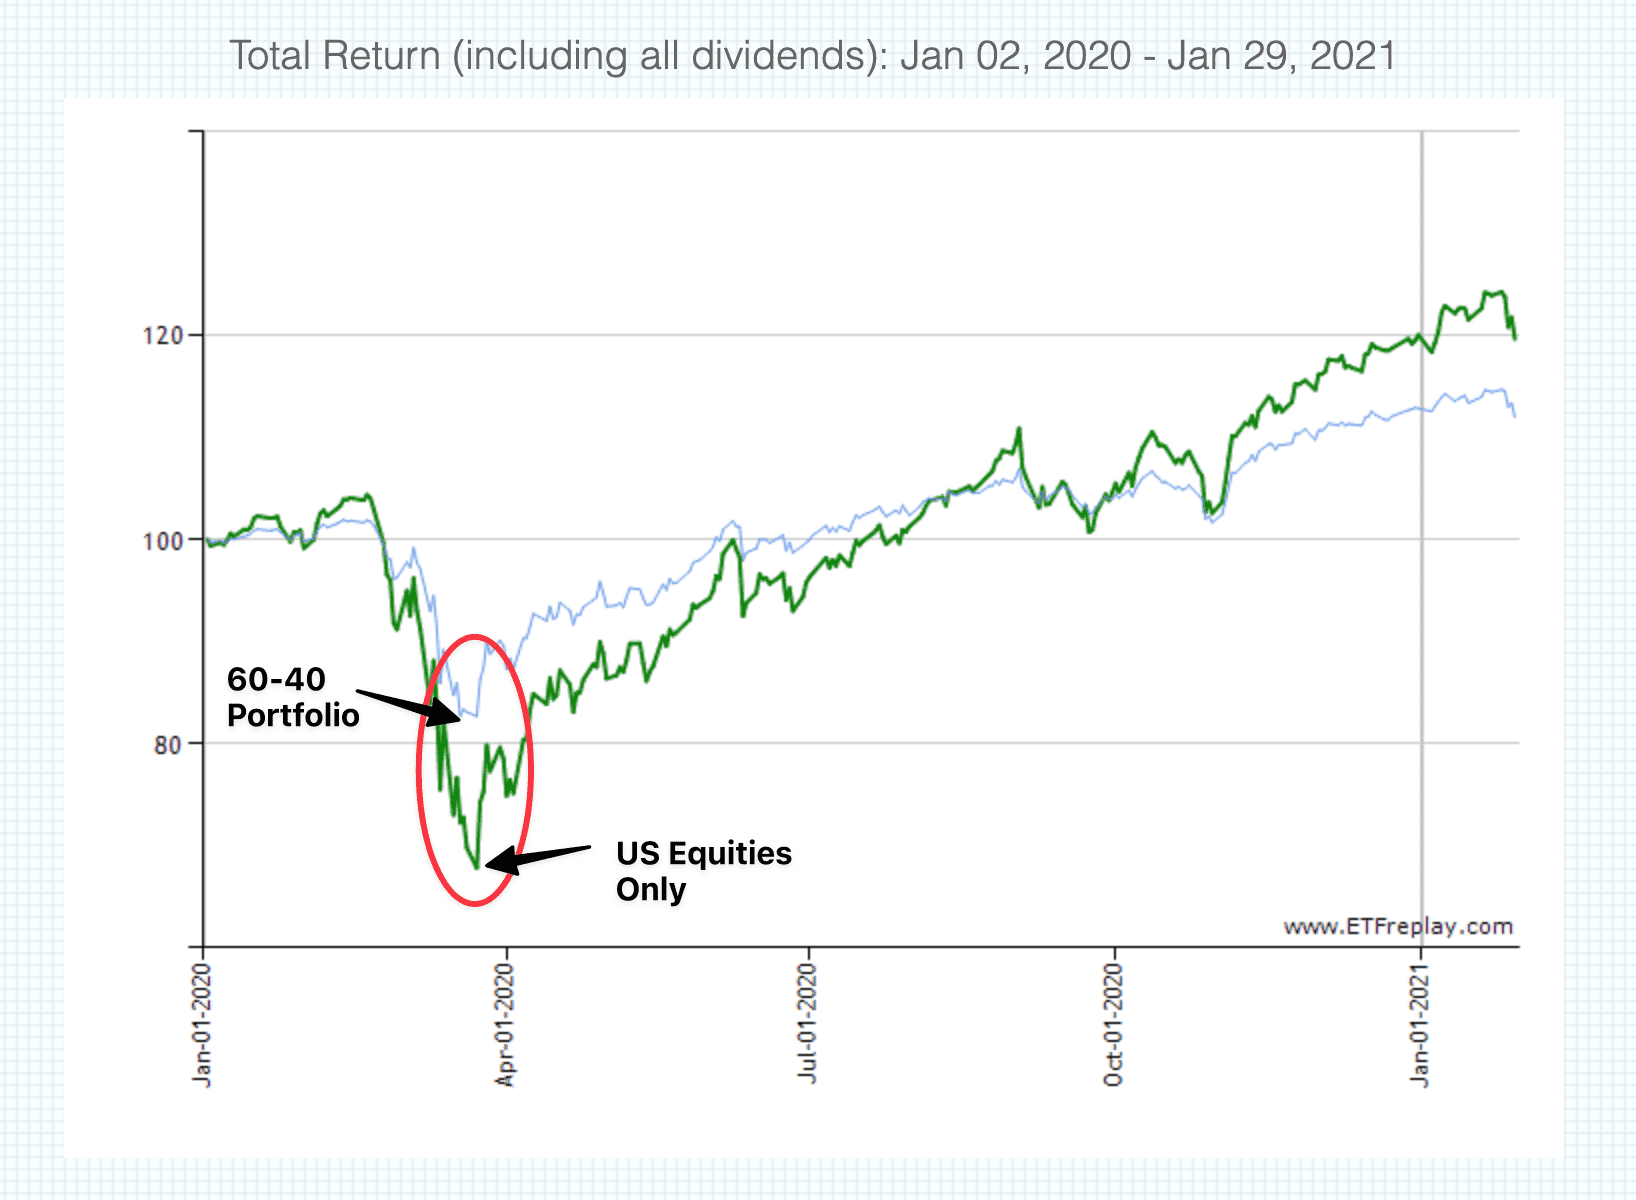 Example portfolio with only US Equities vs 60-40 benchmark showing 16% difference in drawdown